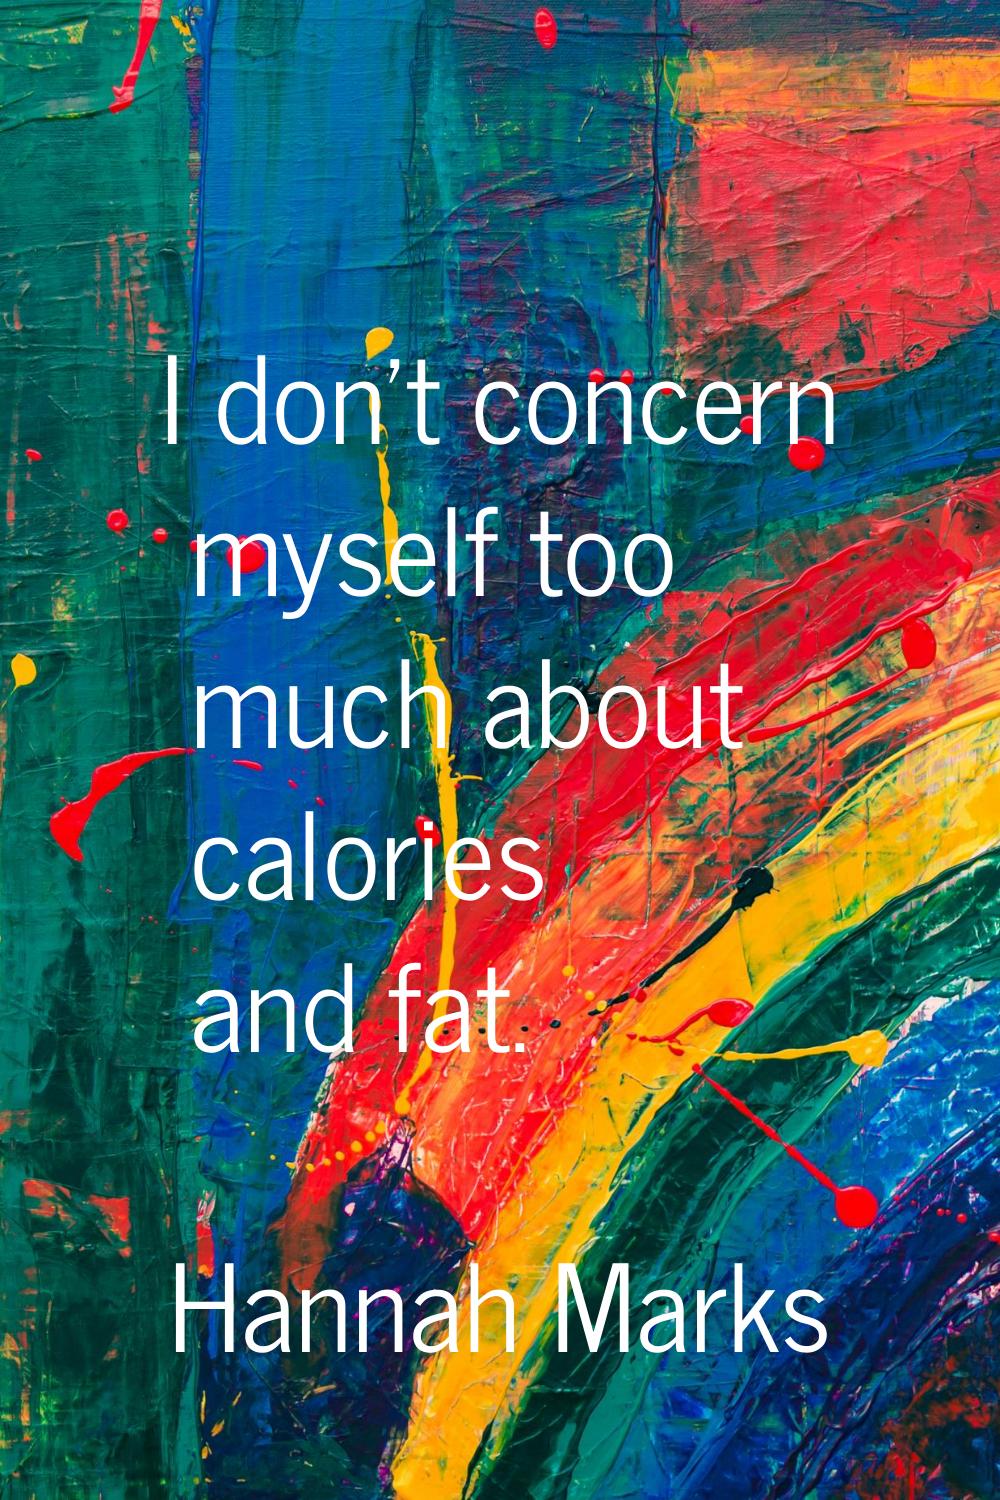 I don't concern myself too much about calories and fat.